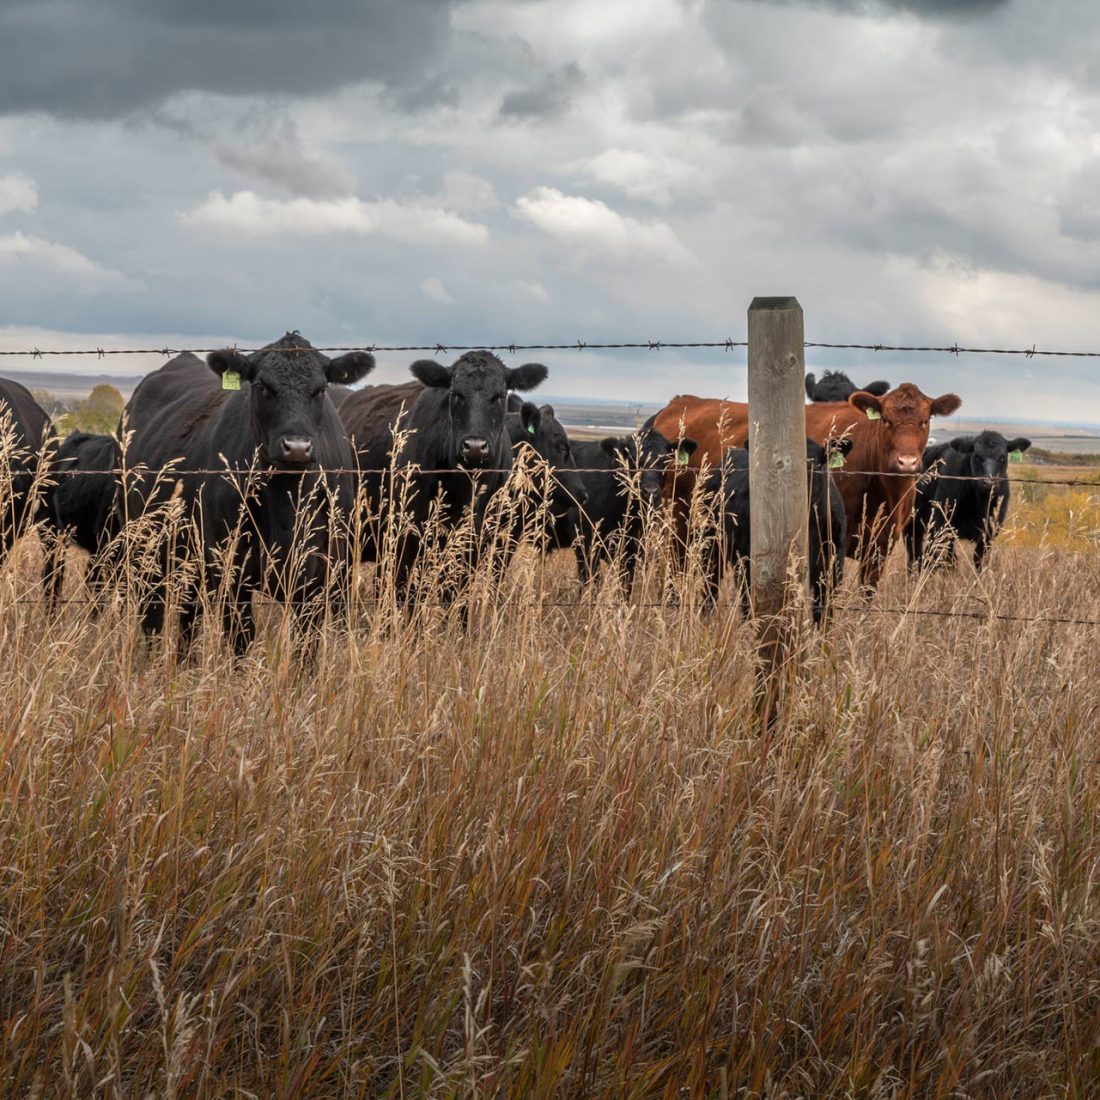 When livestock grazing is managed sustainably, they play a vital role in keeping grasslands healthy and in supporting the 200 types of plants and wildlife that live there.